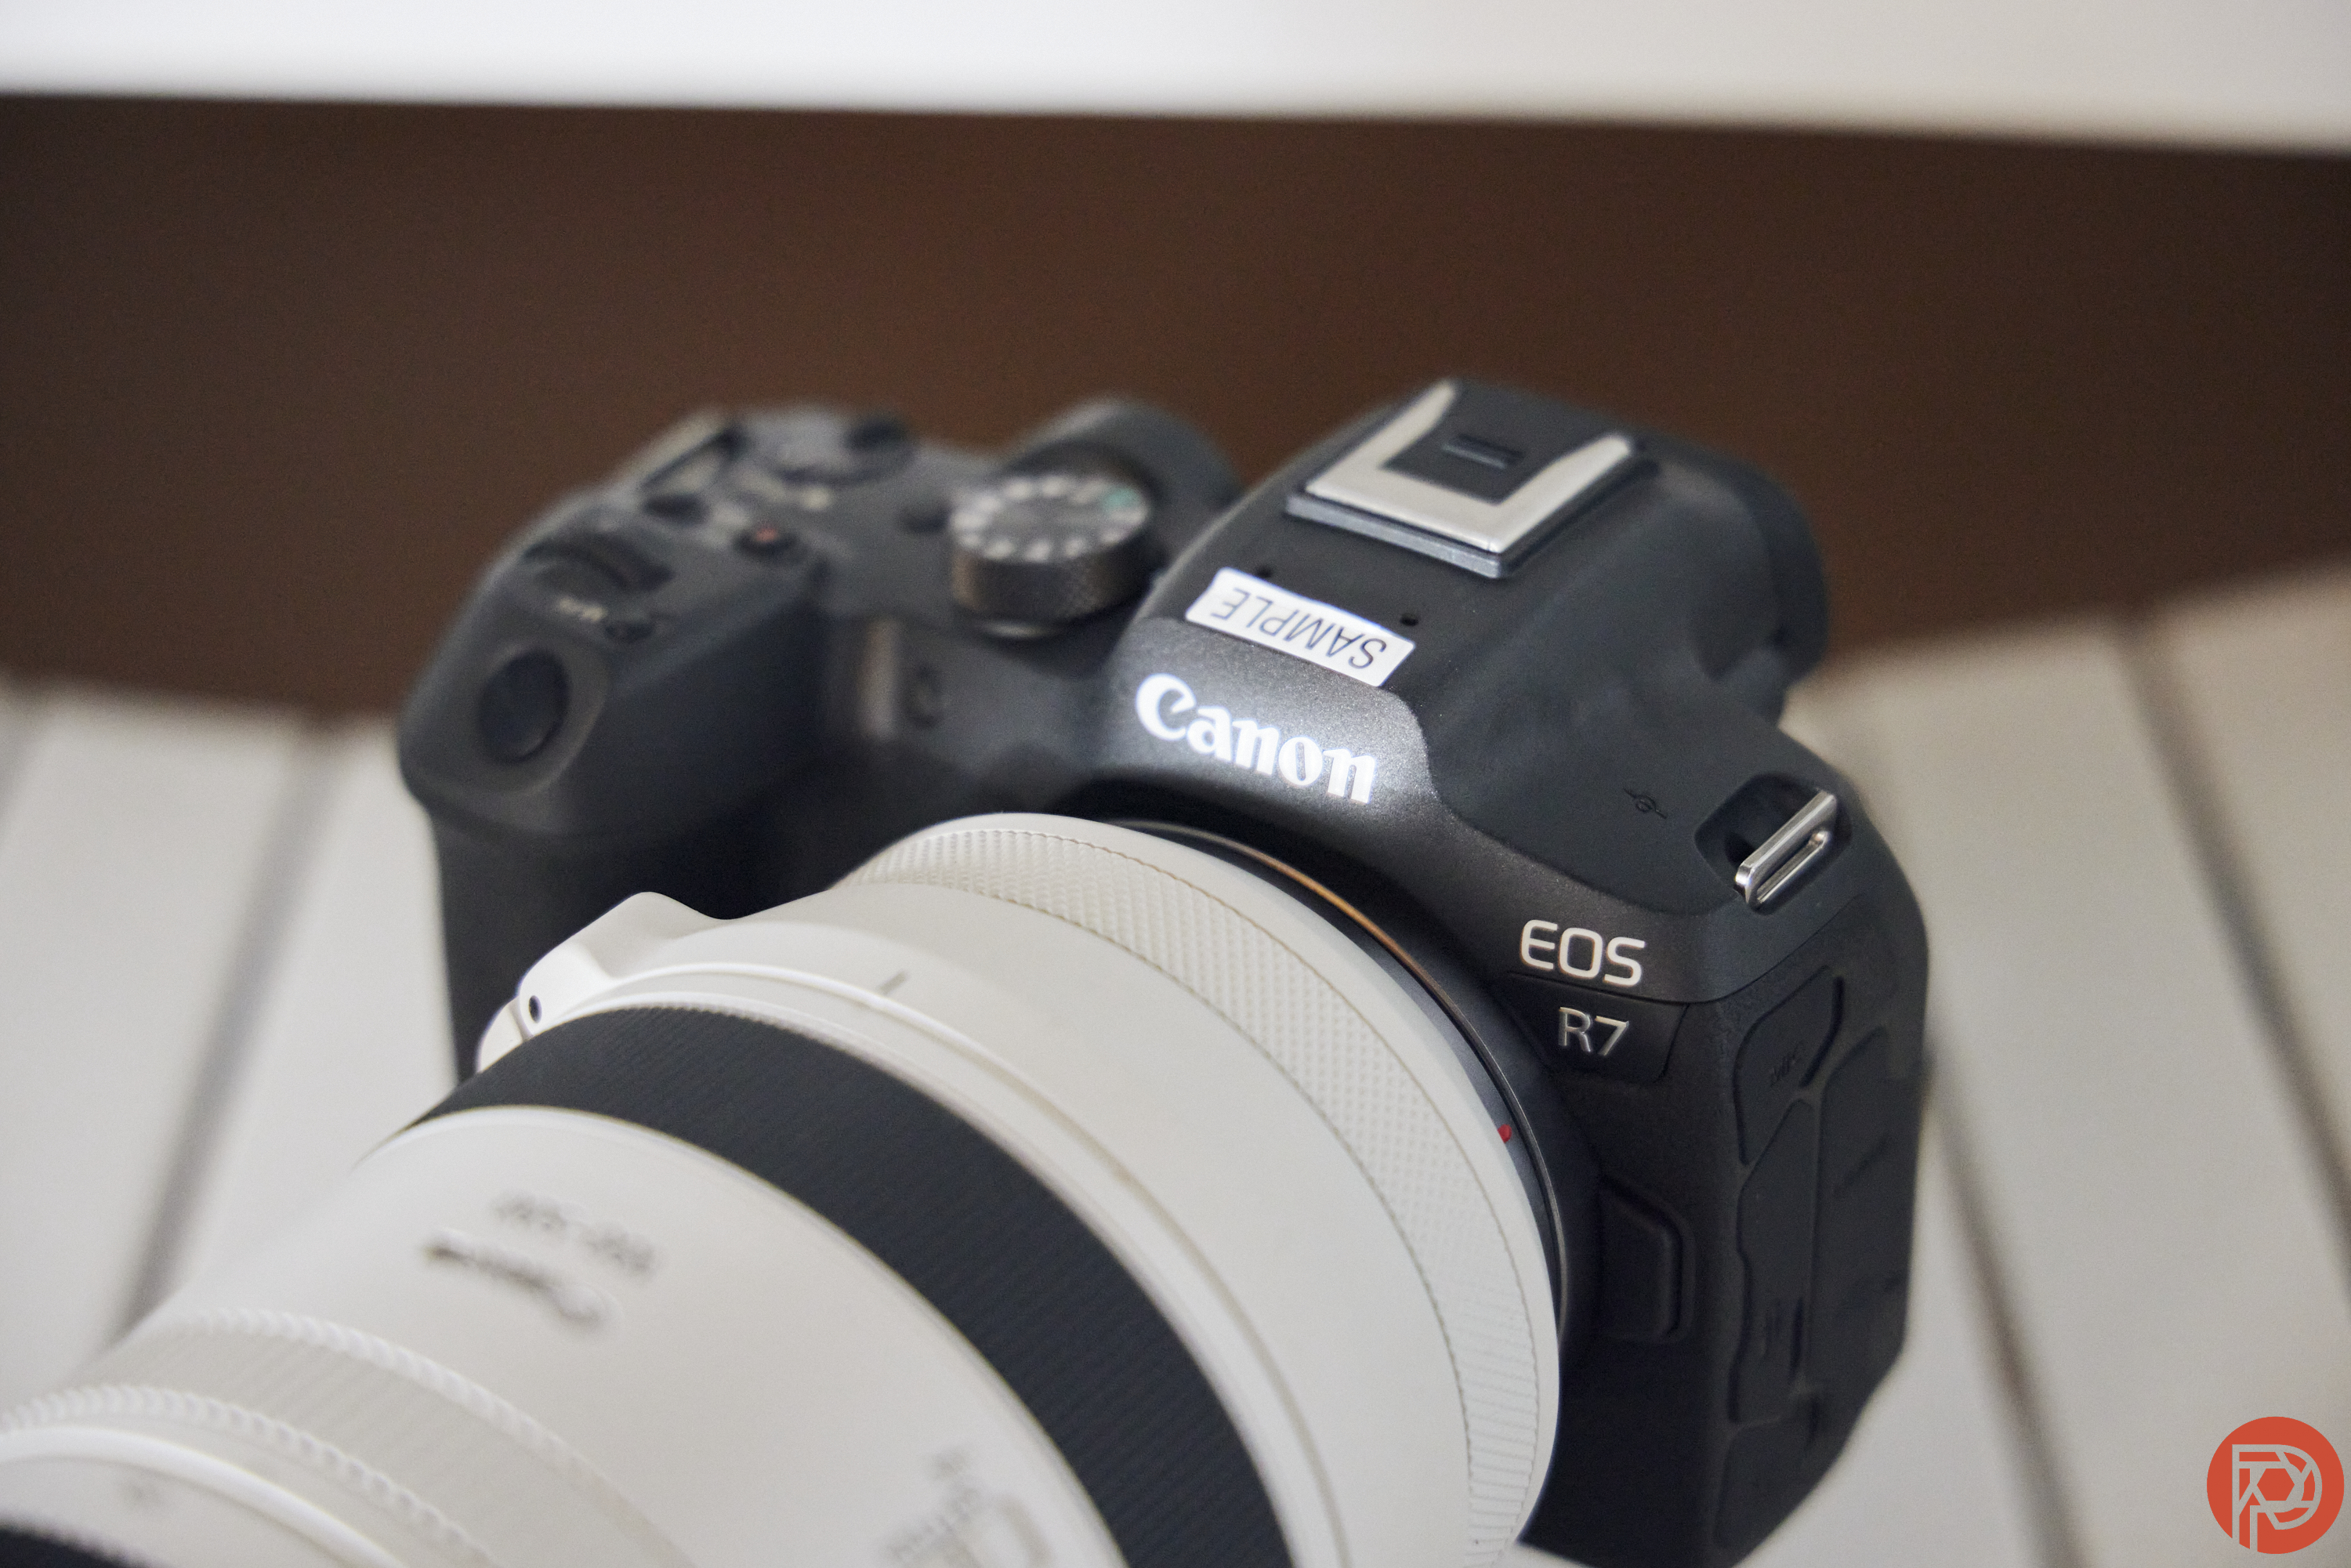 The Big Mistake We Hope Canon APS-C Cameras Don’t Have